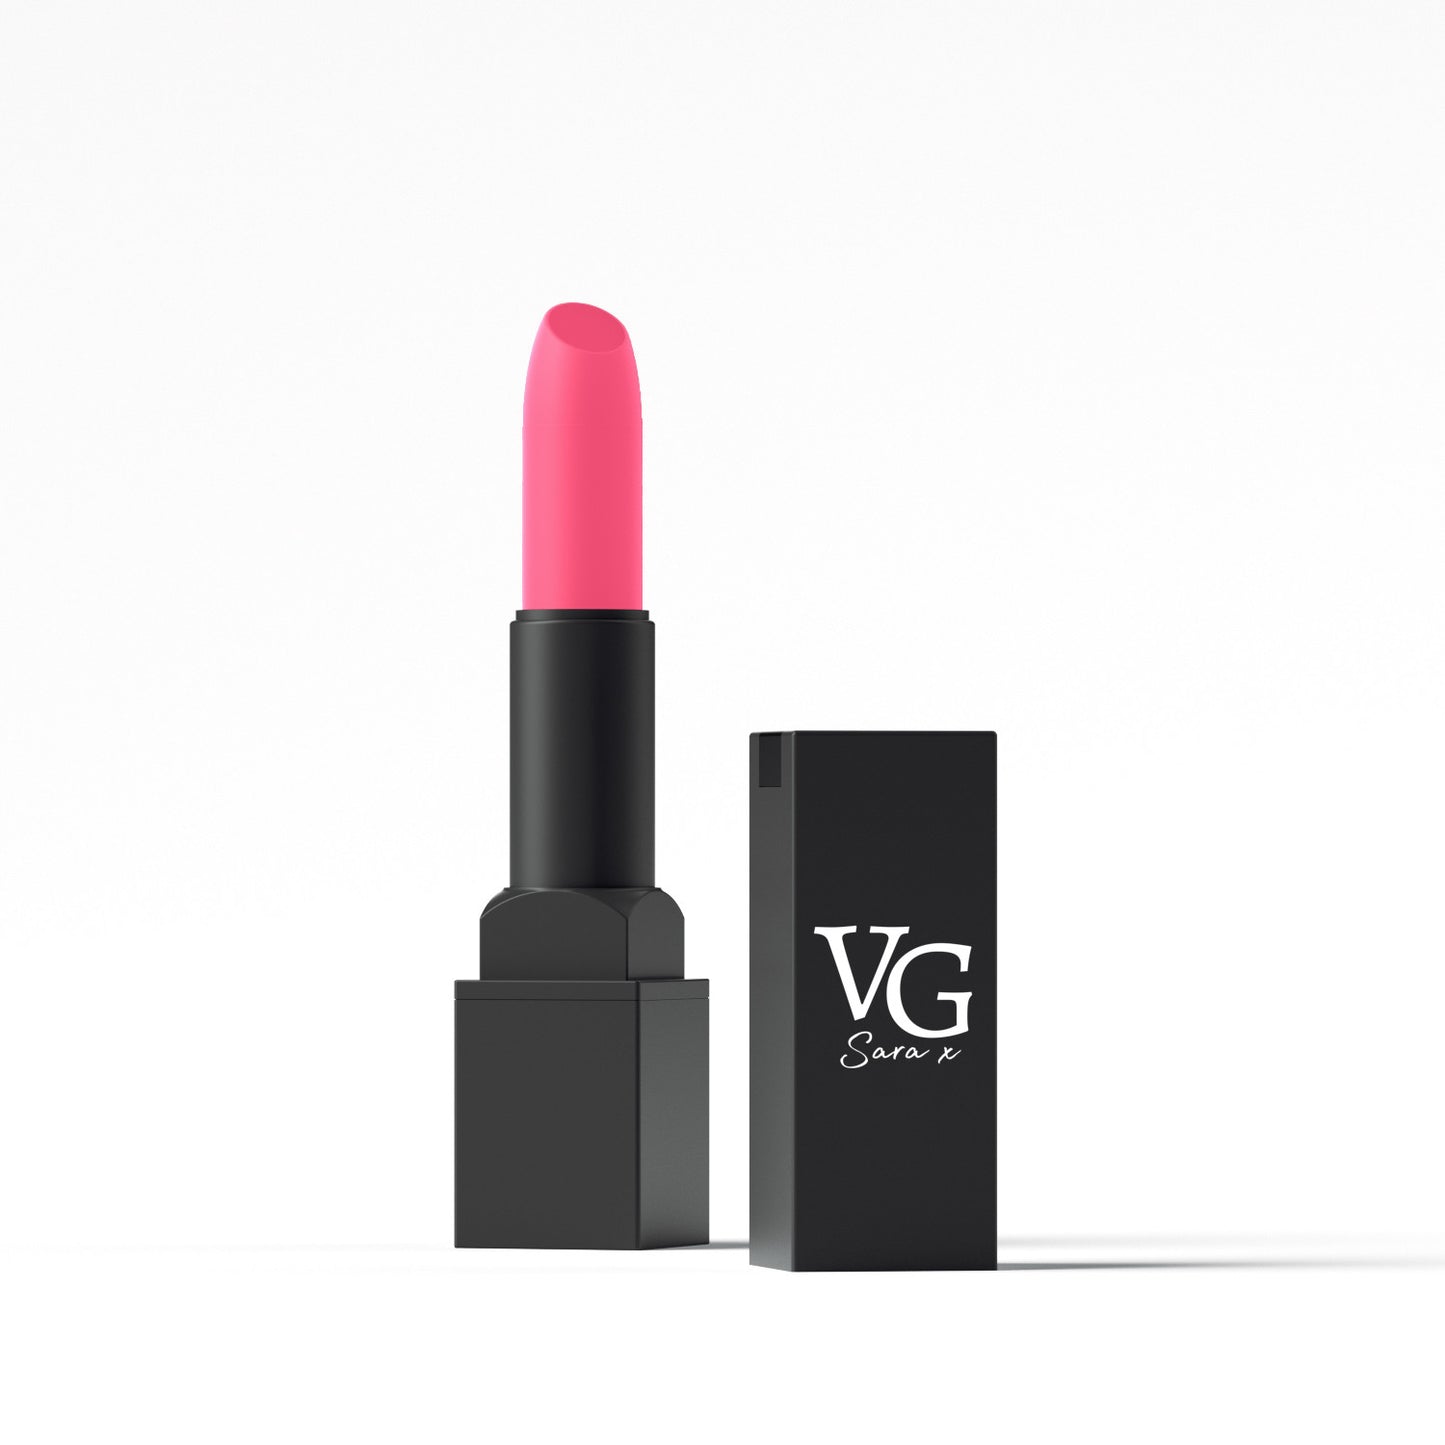 VG lipstick presented with its durable and original  design